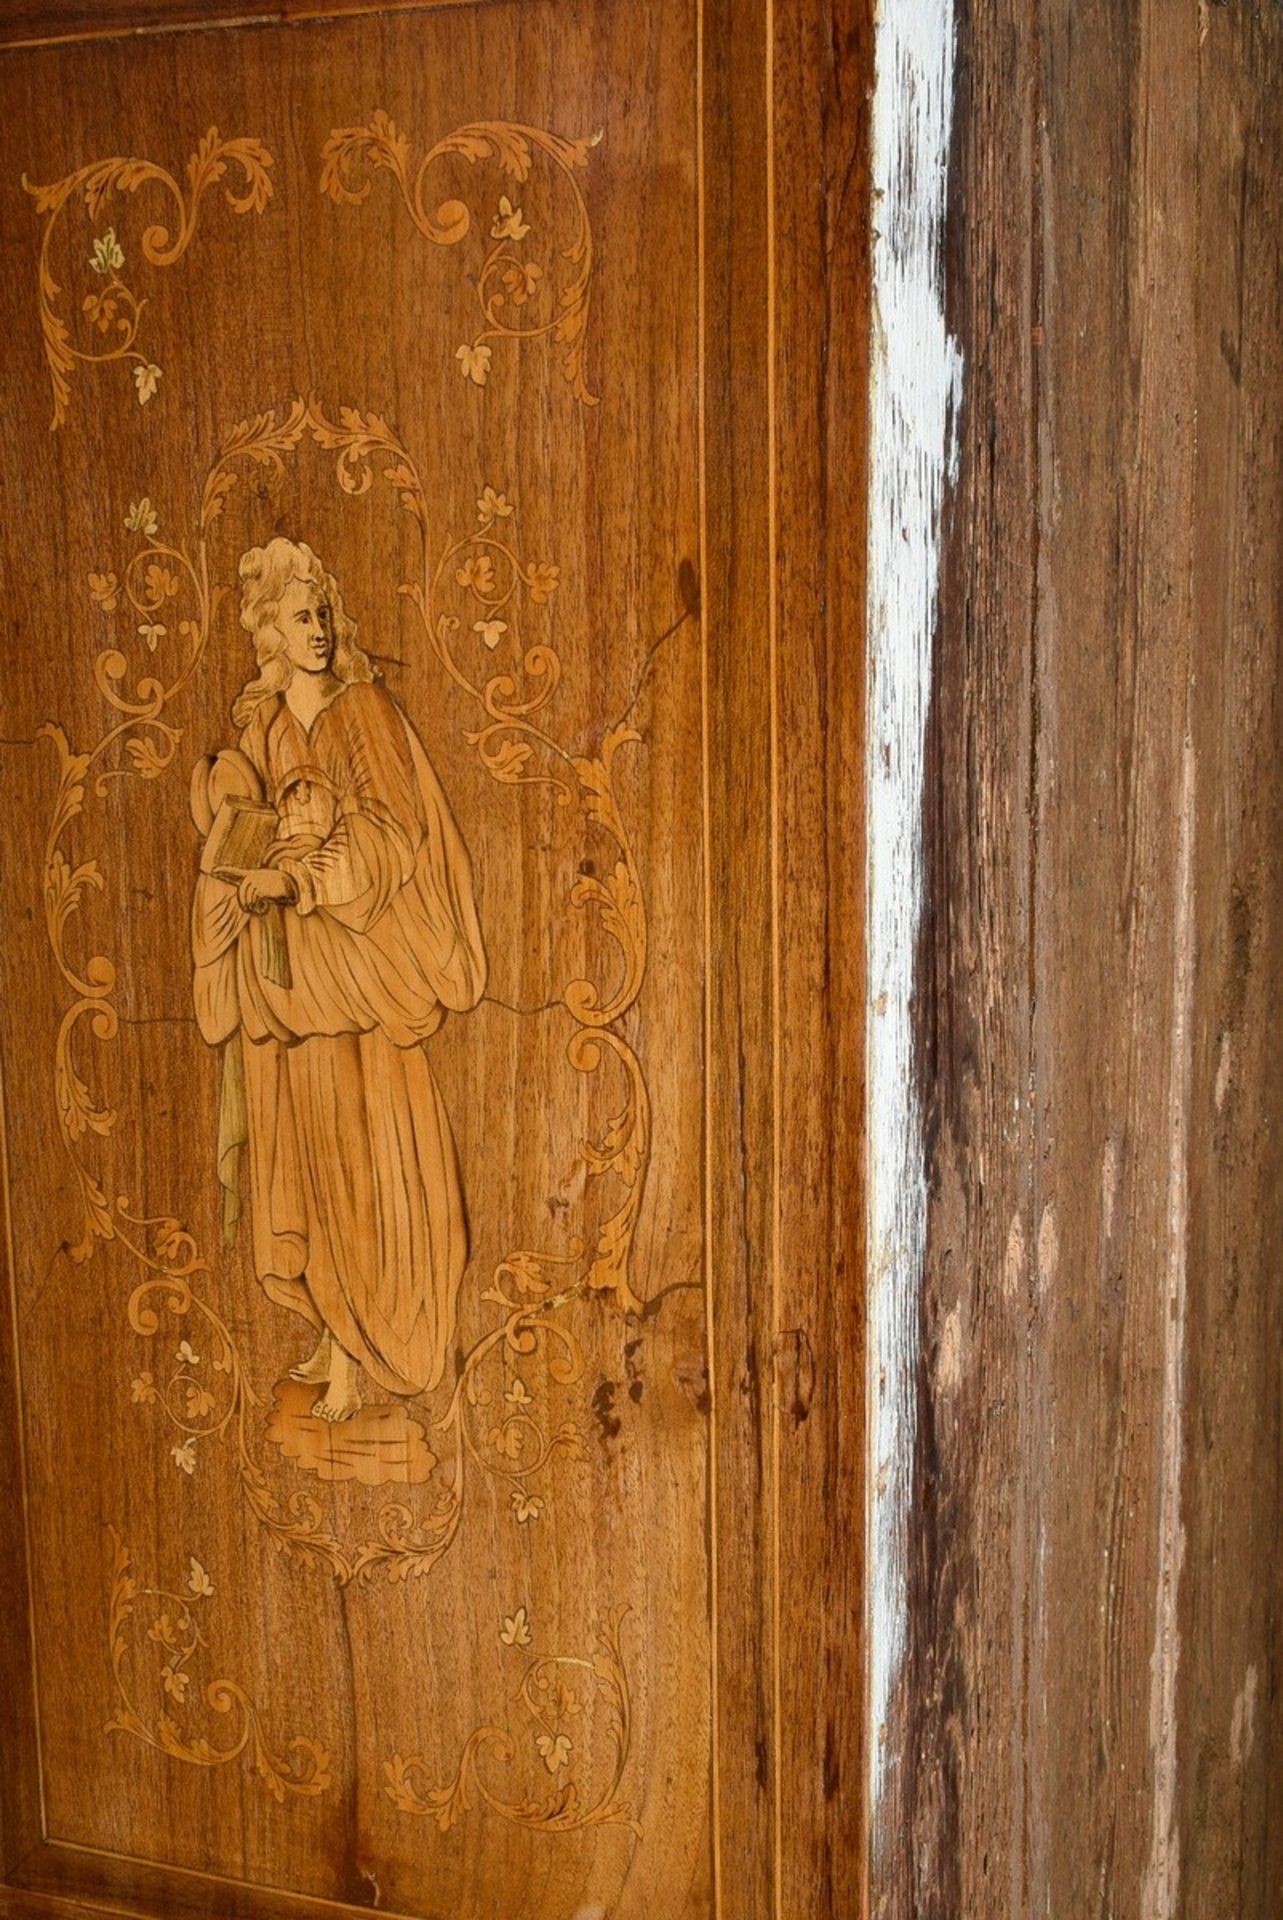 Splendid single-door cabinet with detailed inlays "Allegorical female figures" in classicistic orna - Image 12 of 13